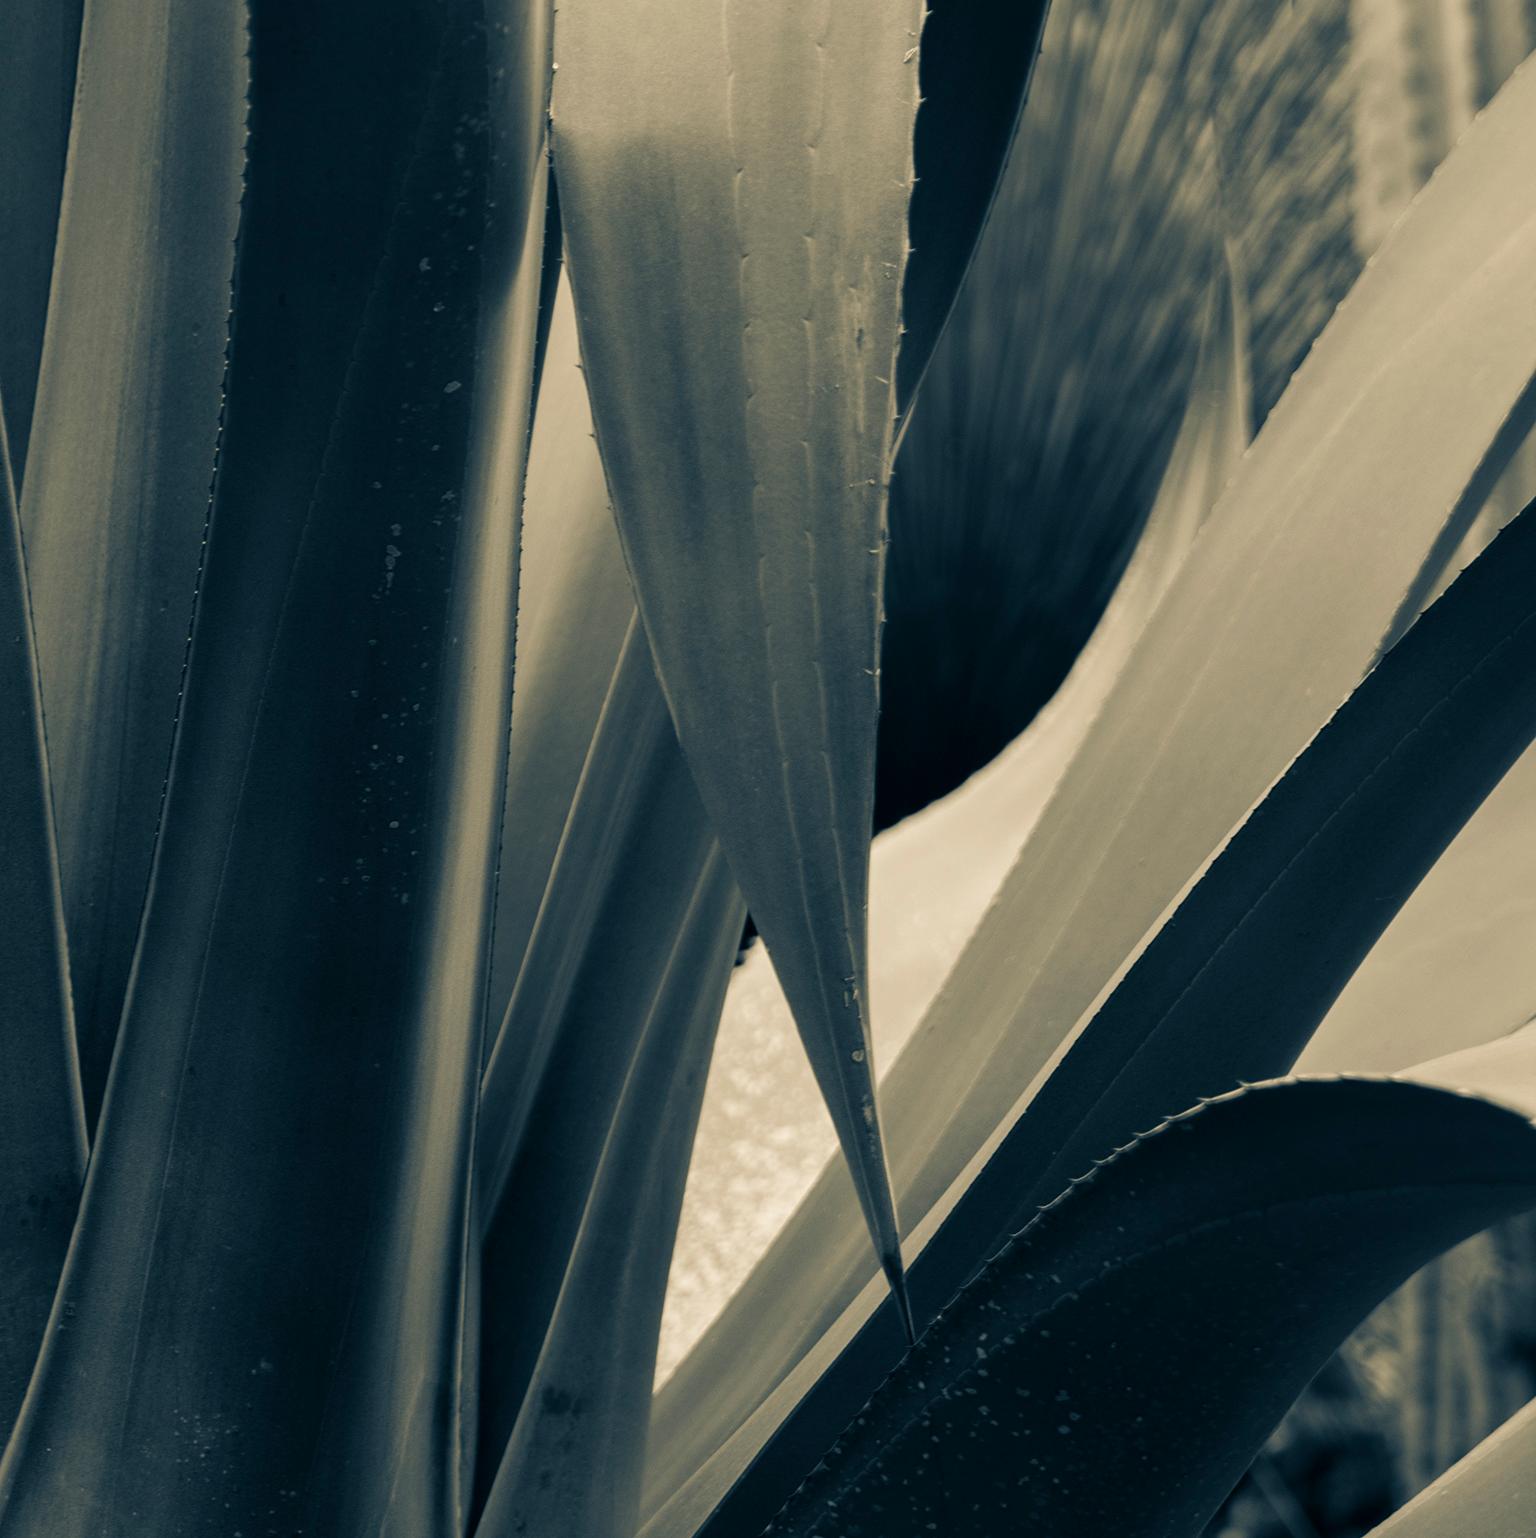 Yucca. Mexico City, Mexico, 2020
Photograph by Cosmo Condina of a yucca plant in tones of Black and White
Archival Pigment Print, 19” X 12.6”, Edition of 10. This is #3/10 in the edition.
 
One of several in this series of photographs of “Yucca”